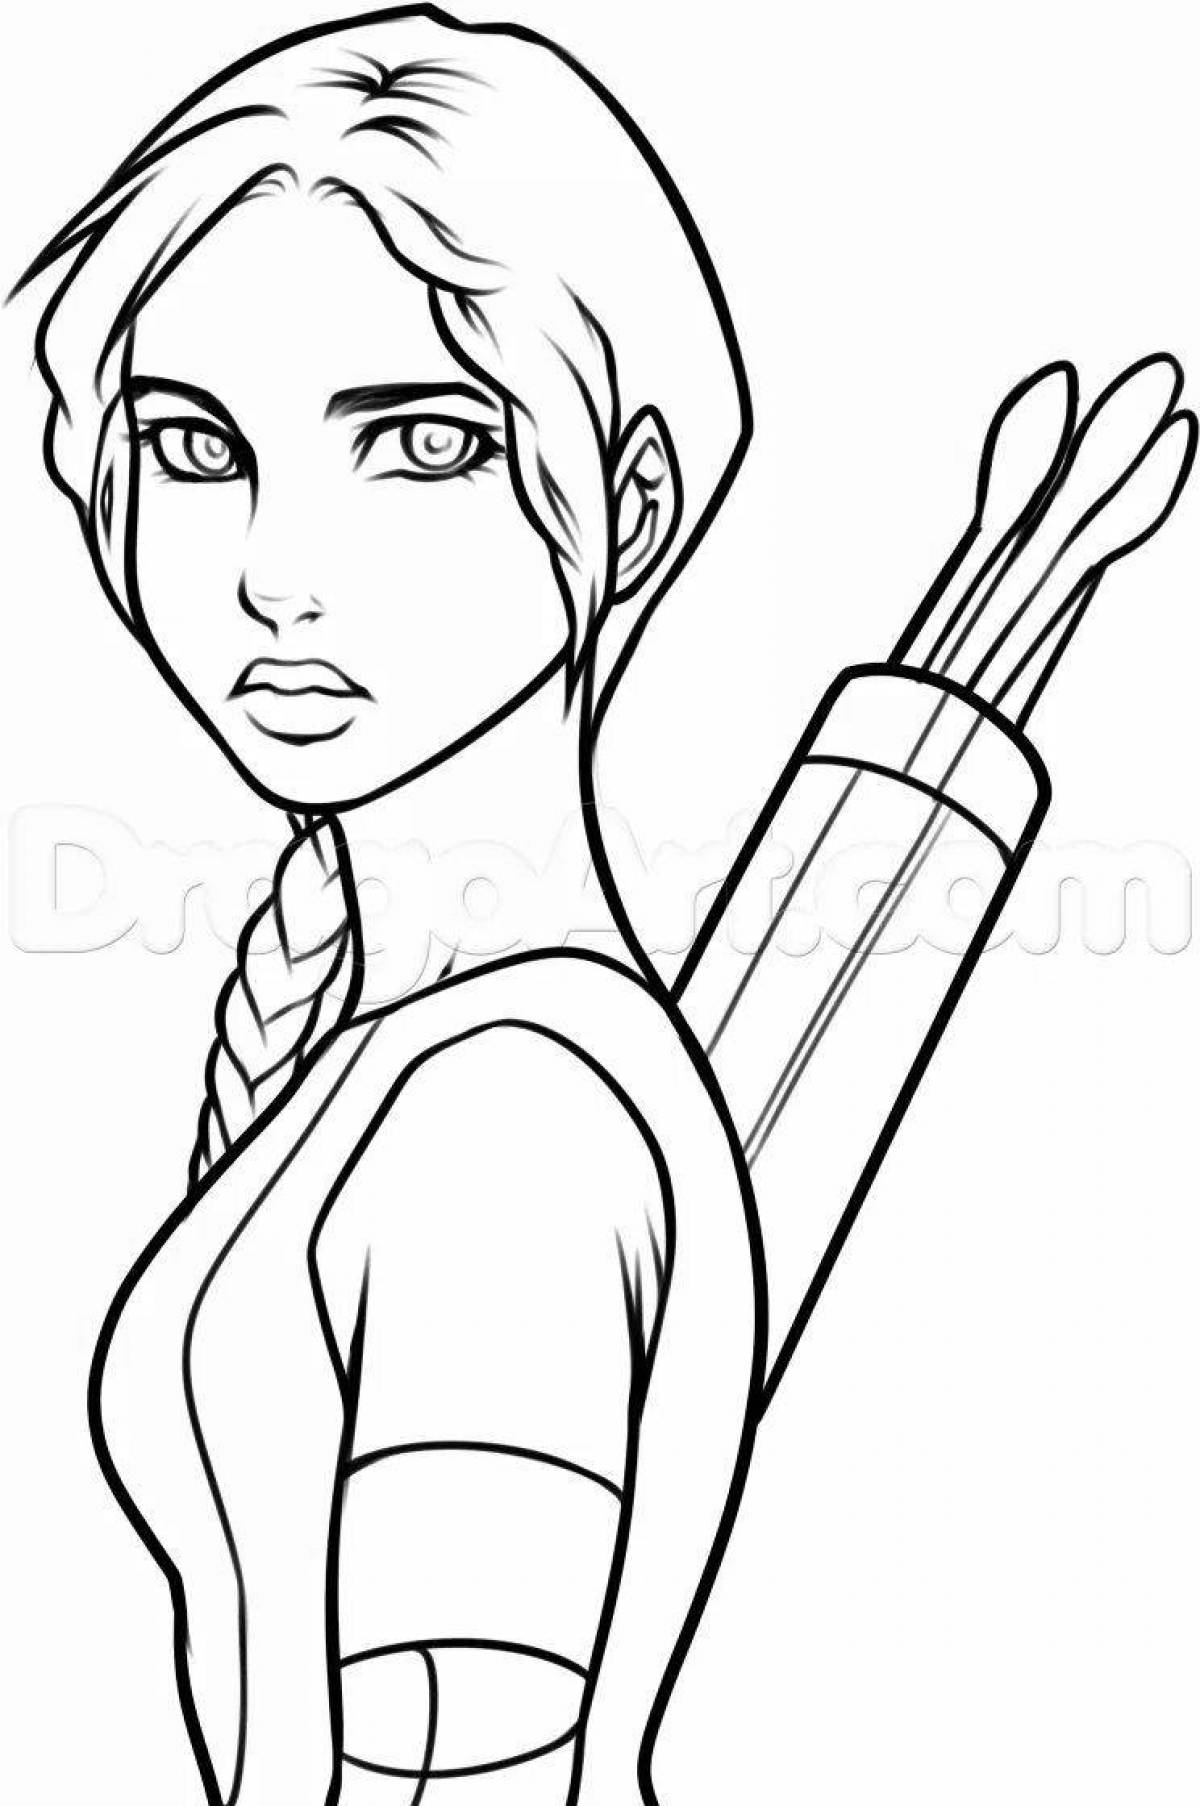 Greatly colored hunger games coloring page